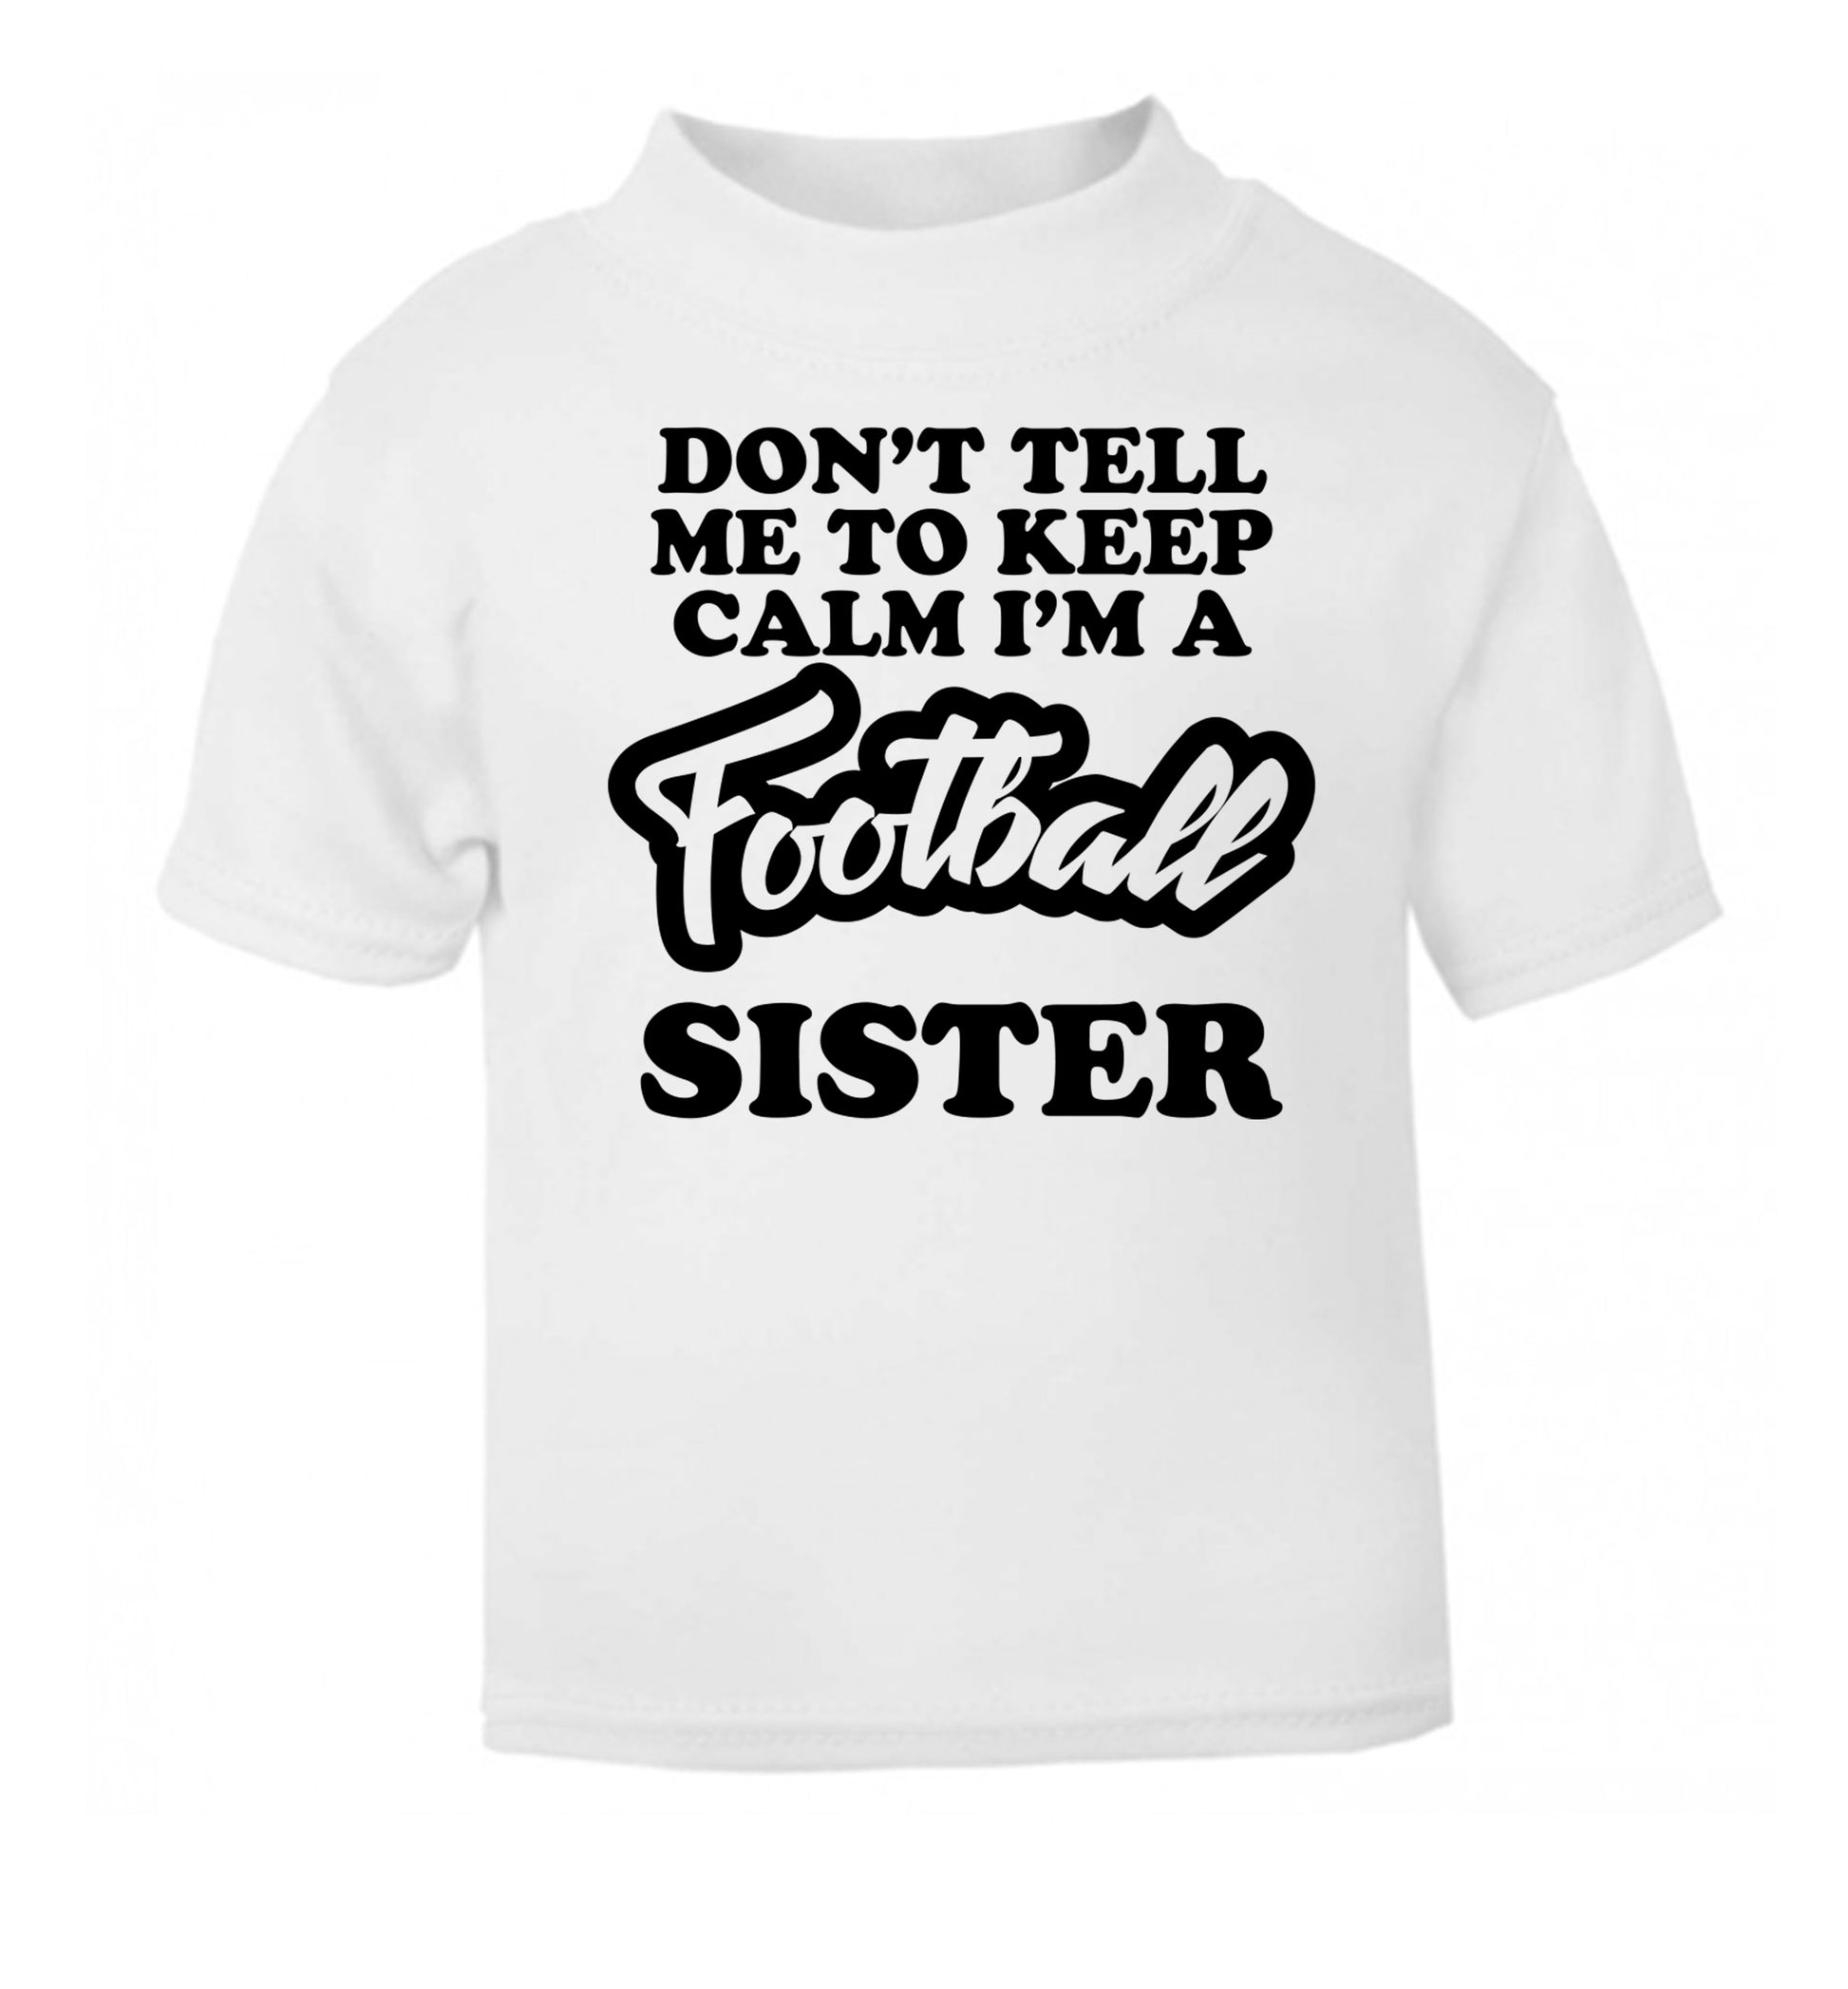 Don't tell me to keep calm I'm a football sister white Baby Toddler Tshirt 2 Years